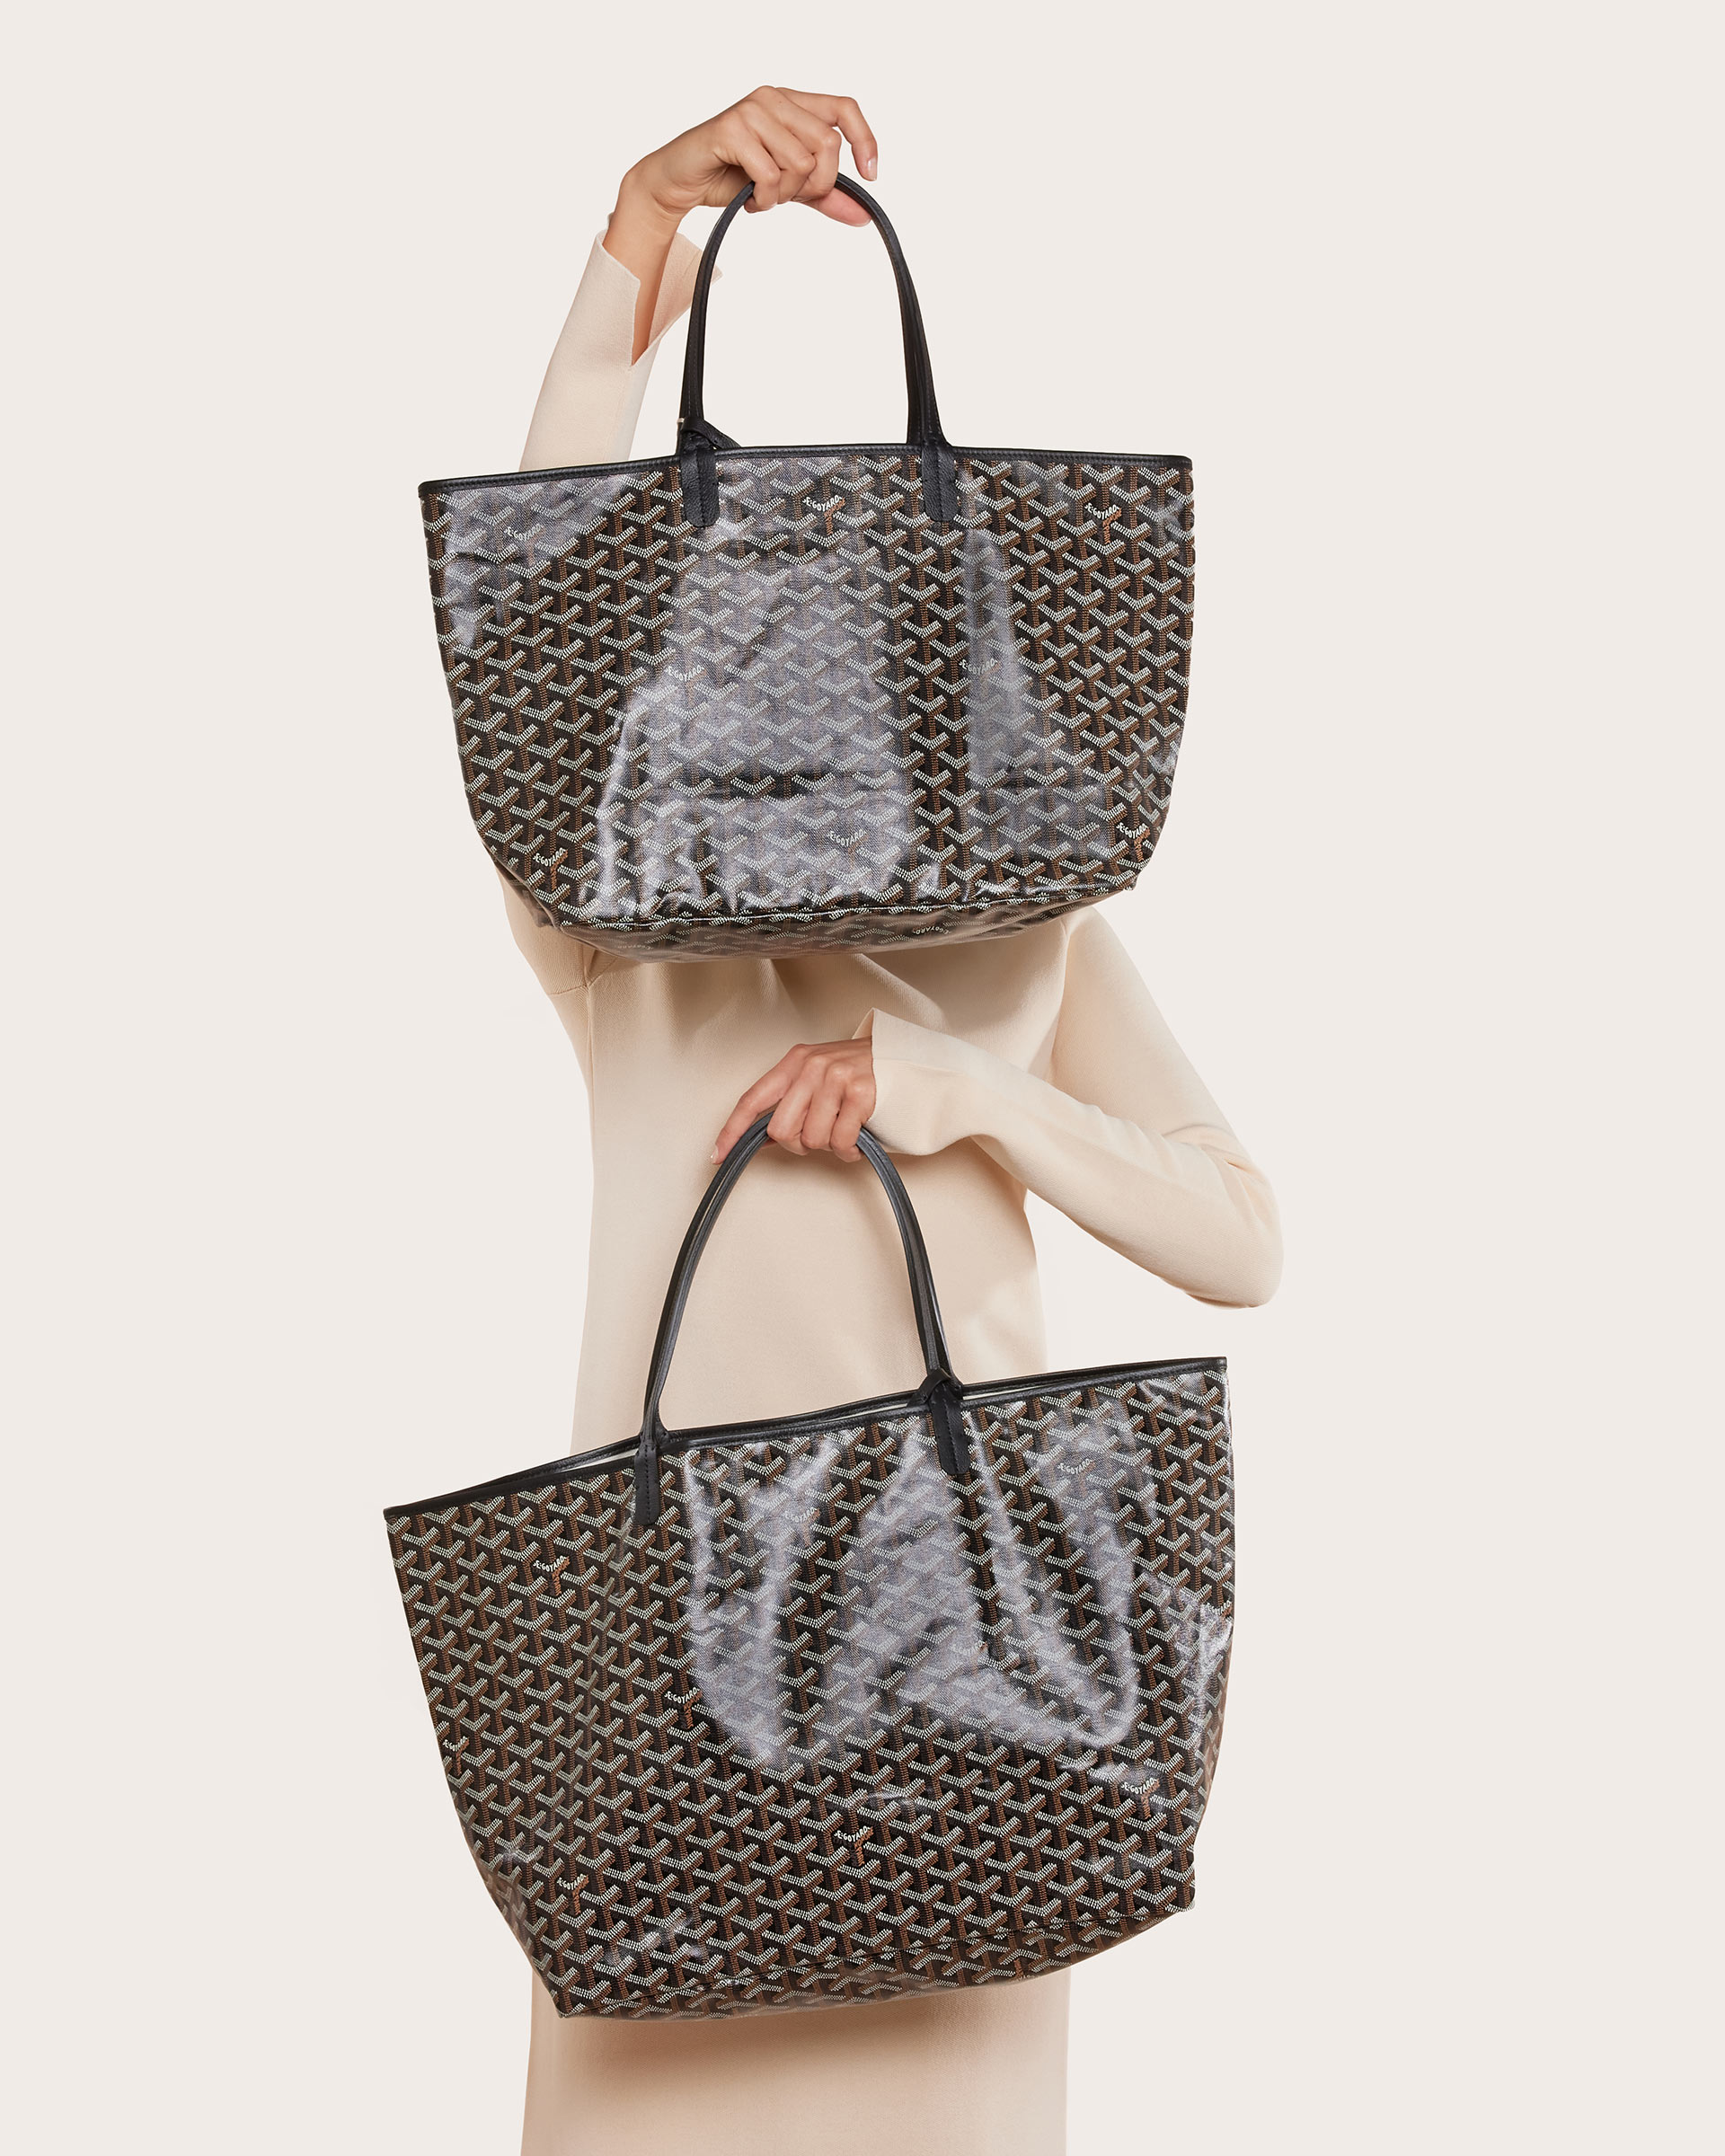 studio image of model holding two Goyard St Louis tote bags FASHIONPHILE